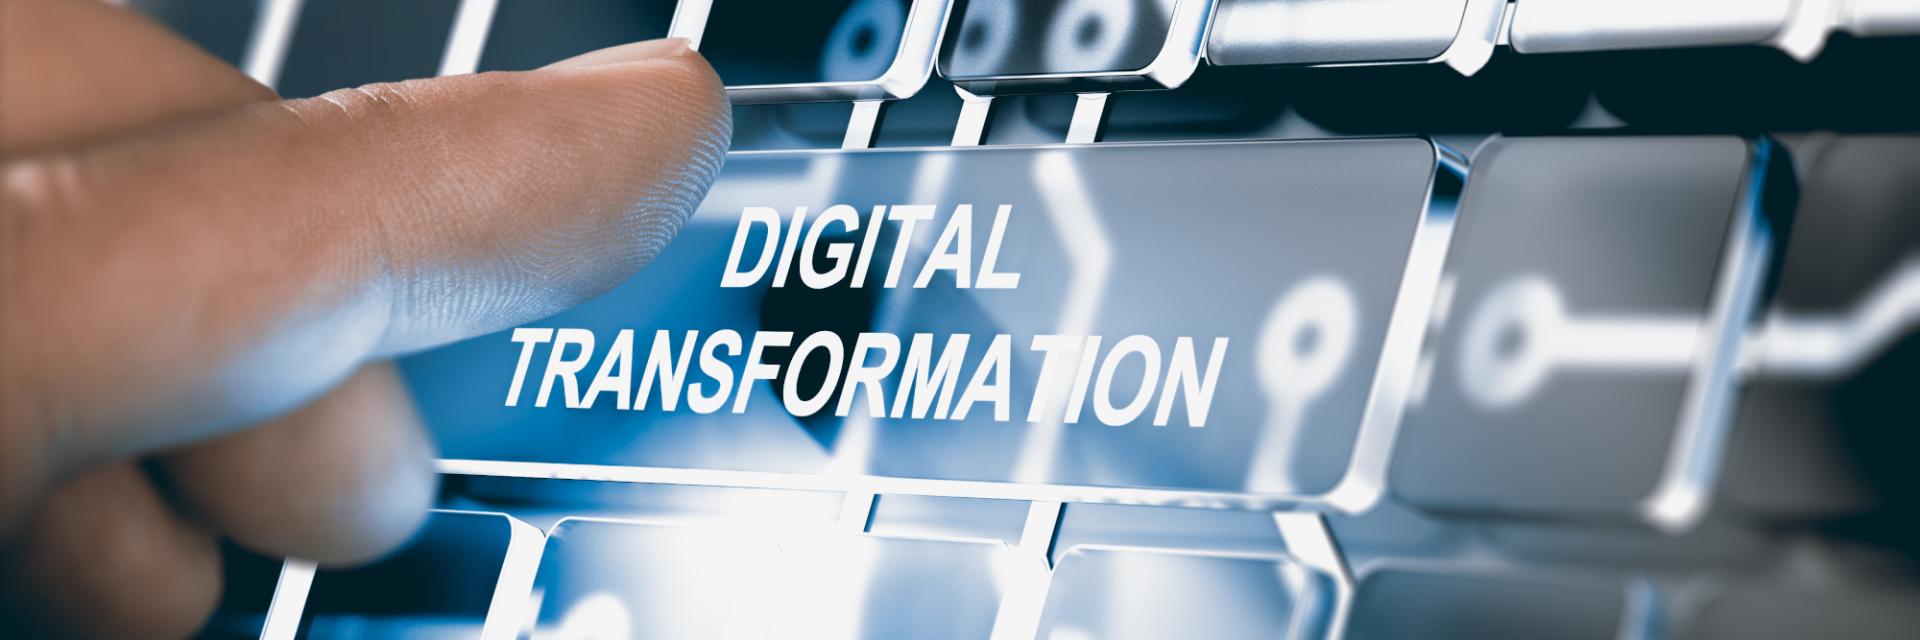 ECA and Botswana’s Foreign Affairs launch a Performance Dashboard System in line with the country’s national digital transformation strategy